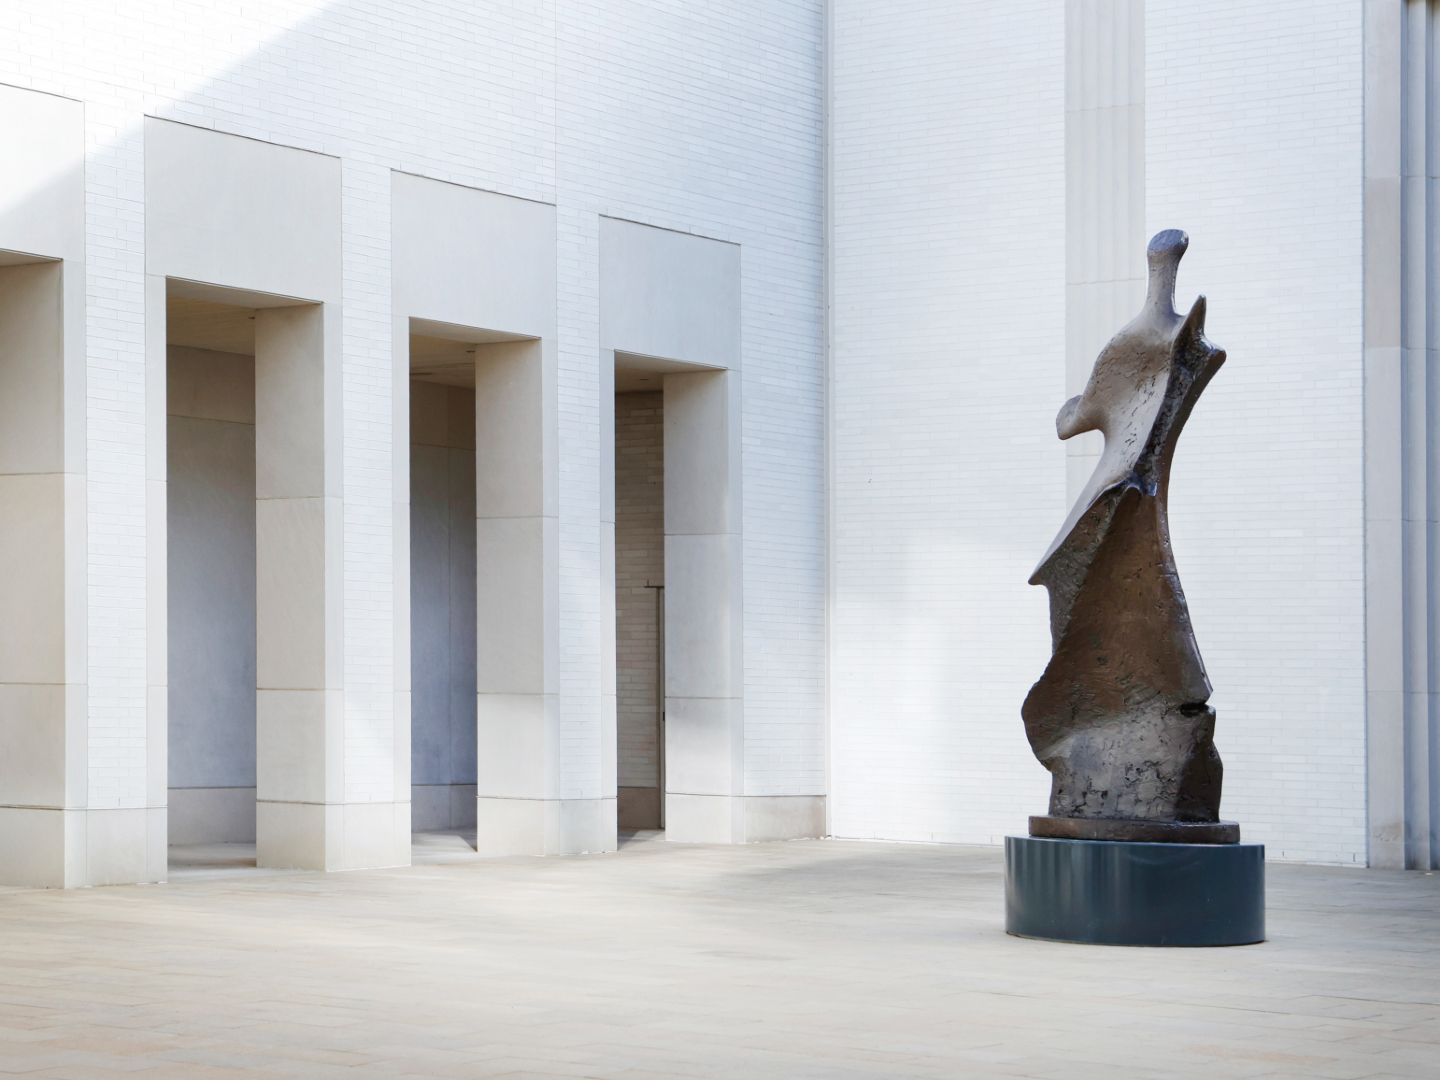 Daytime photo of a bronze sculpture by Henry Moore at the Courtyard Entrance to AMFA.